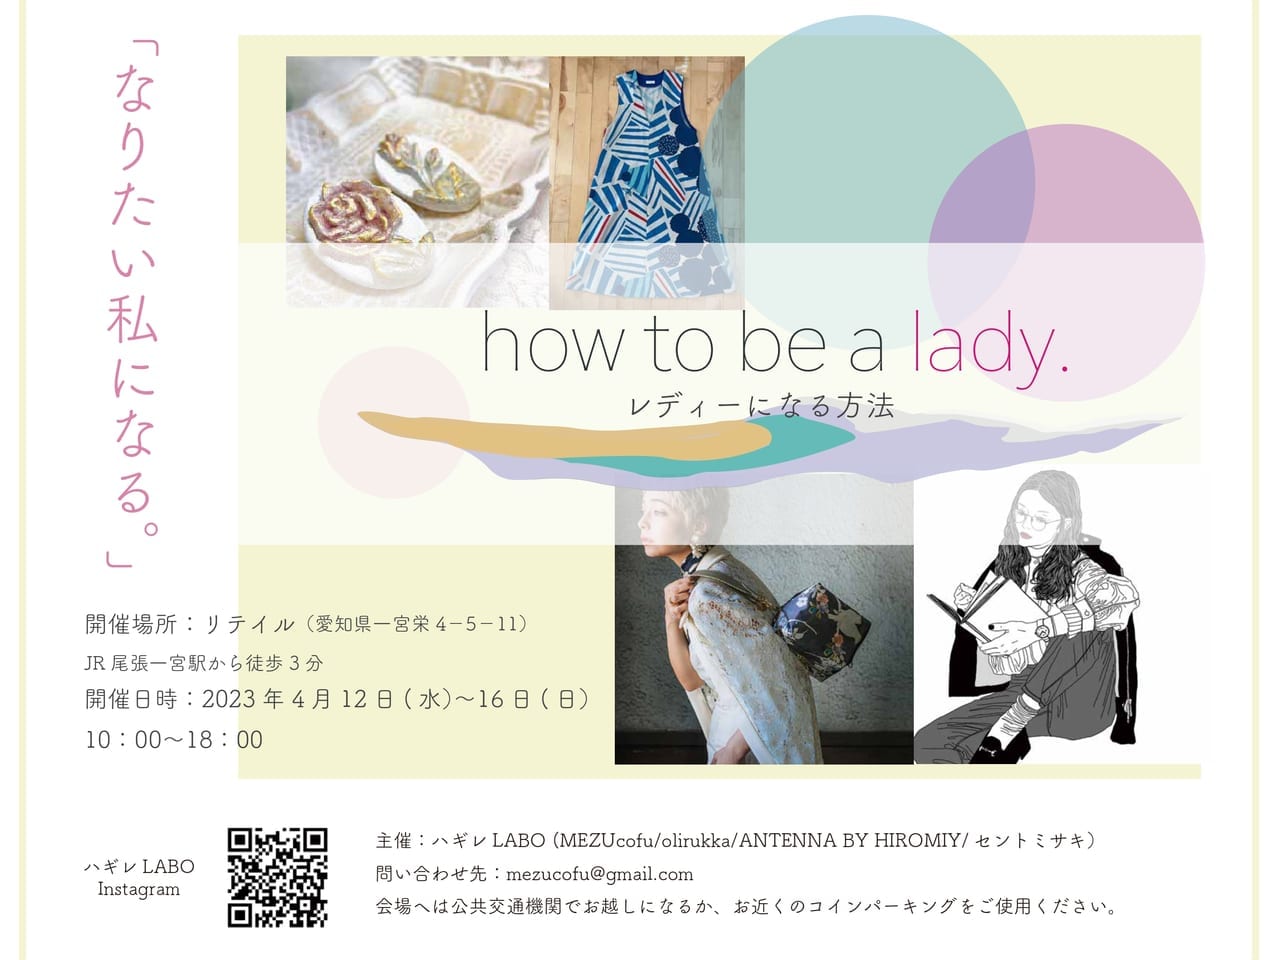 how to be a lady. レディーになる方法　イベント